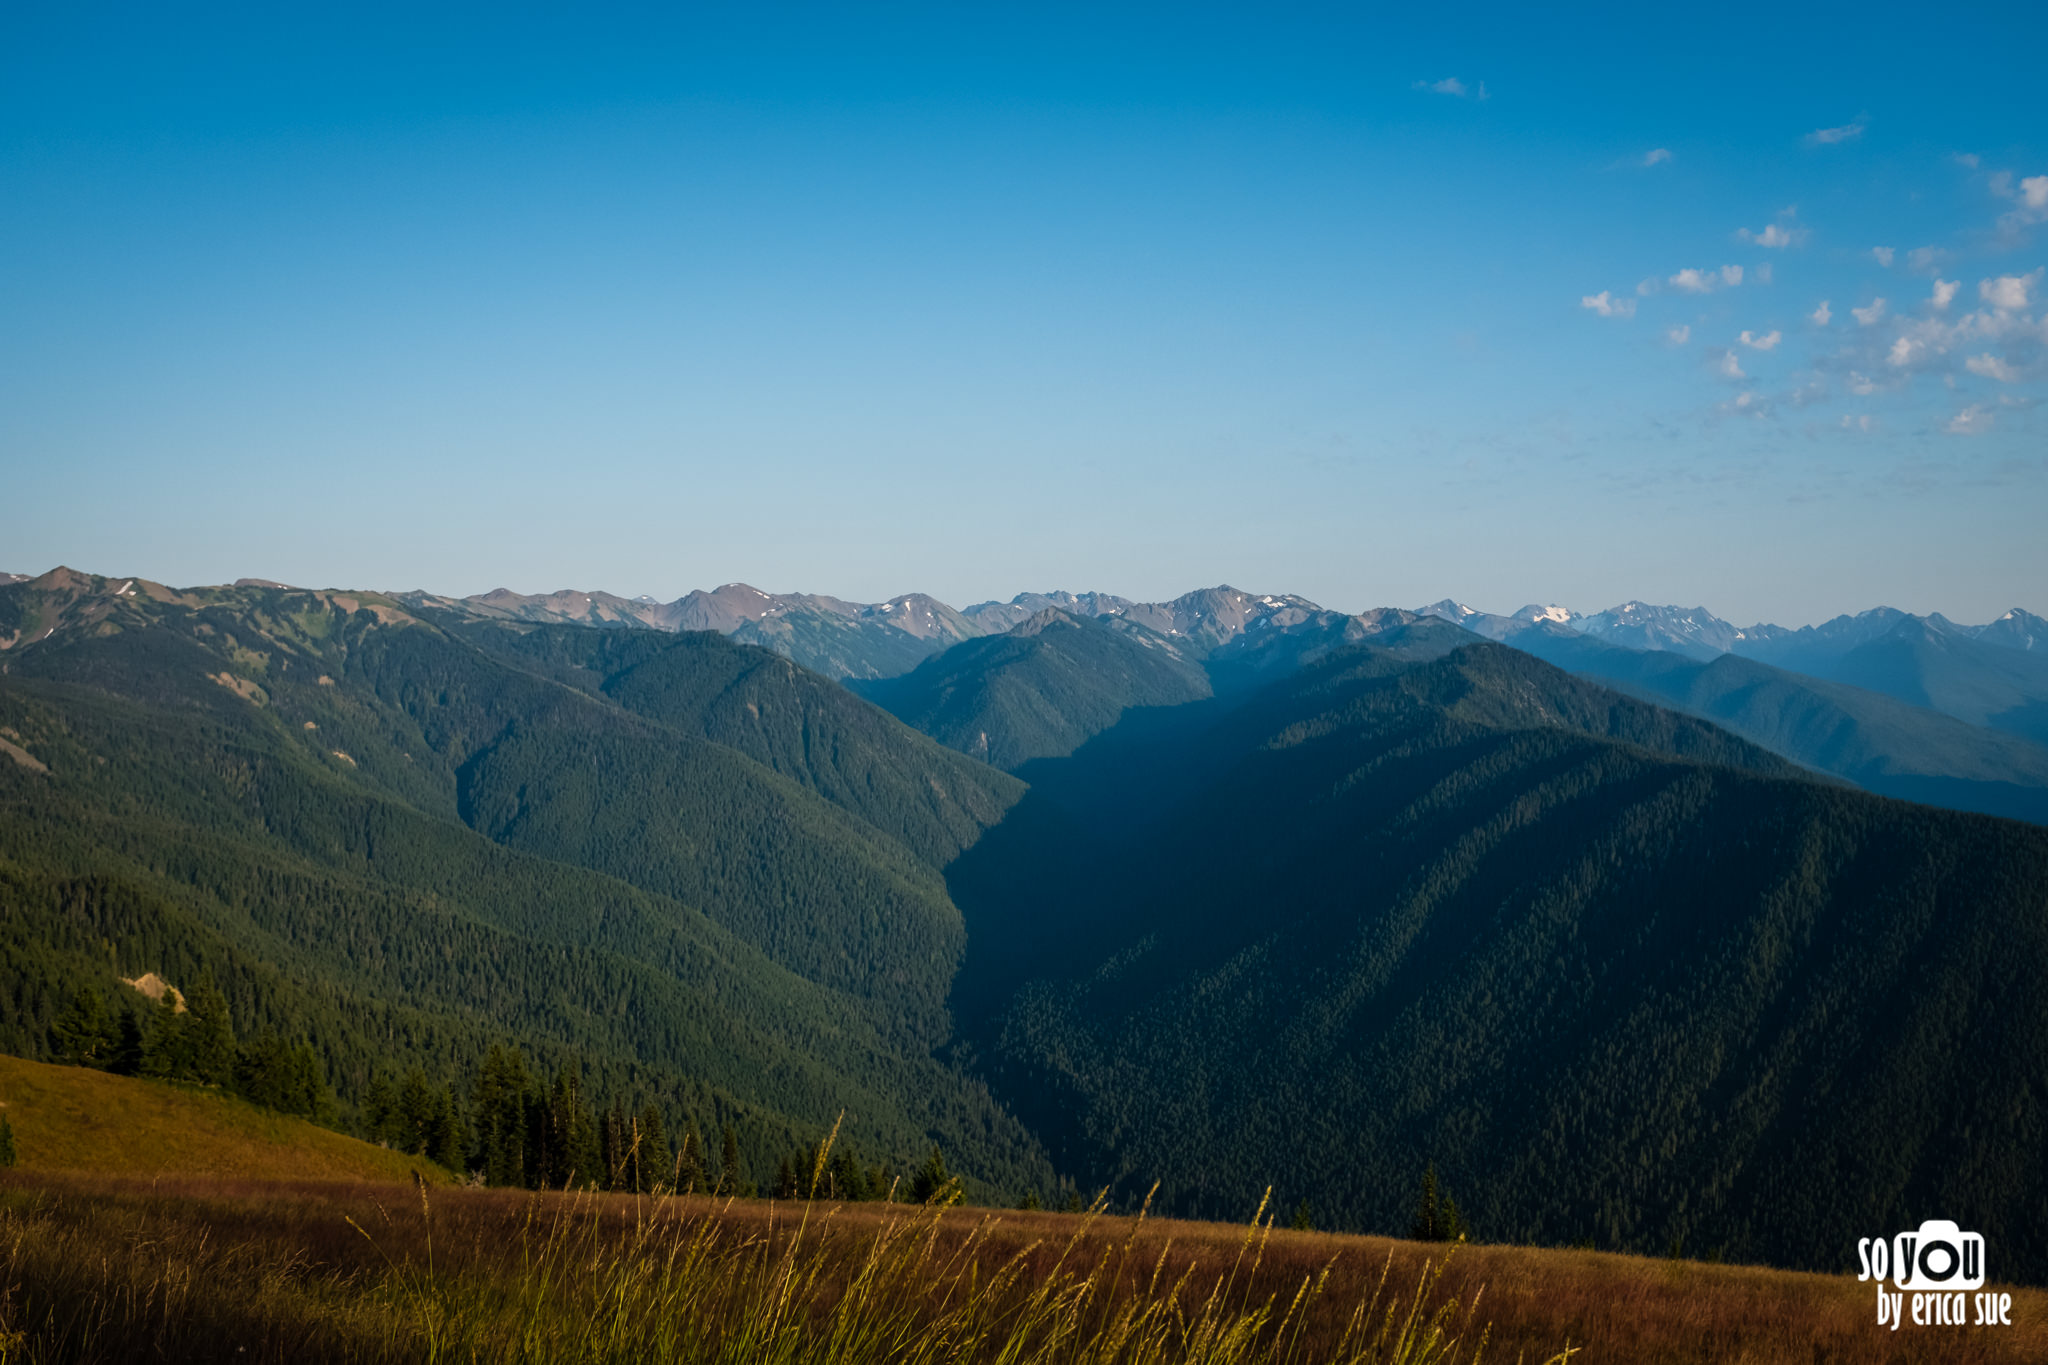 so-you-by-erica-sue-travels-olympic-national-park-road-trip-itinerary-3106.JPG